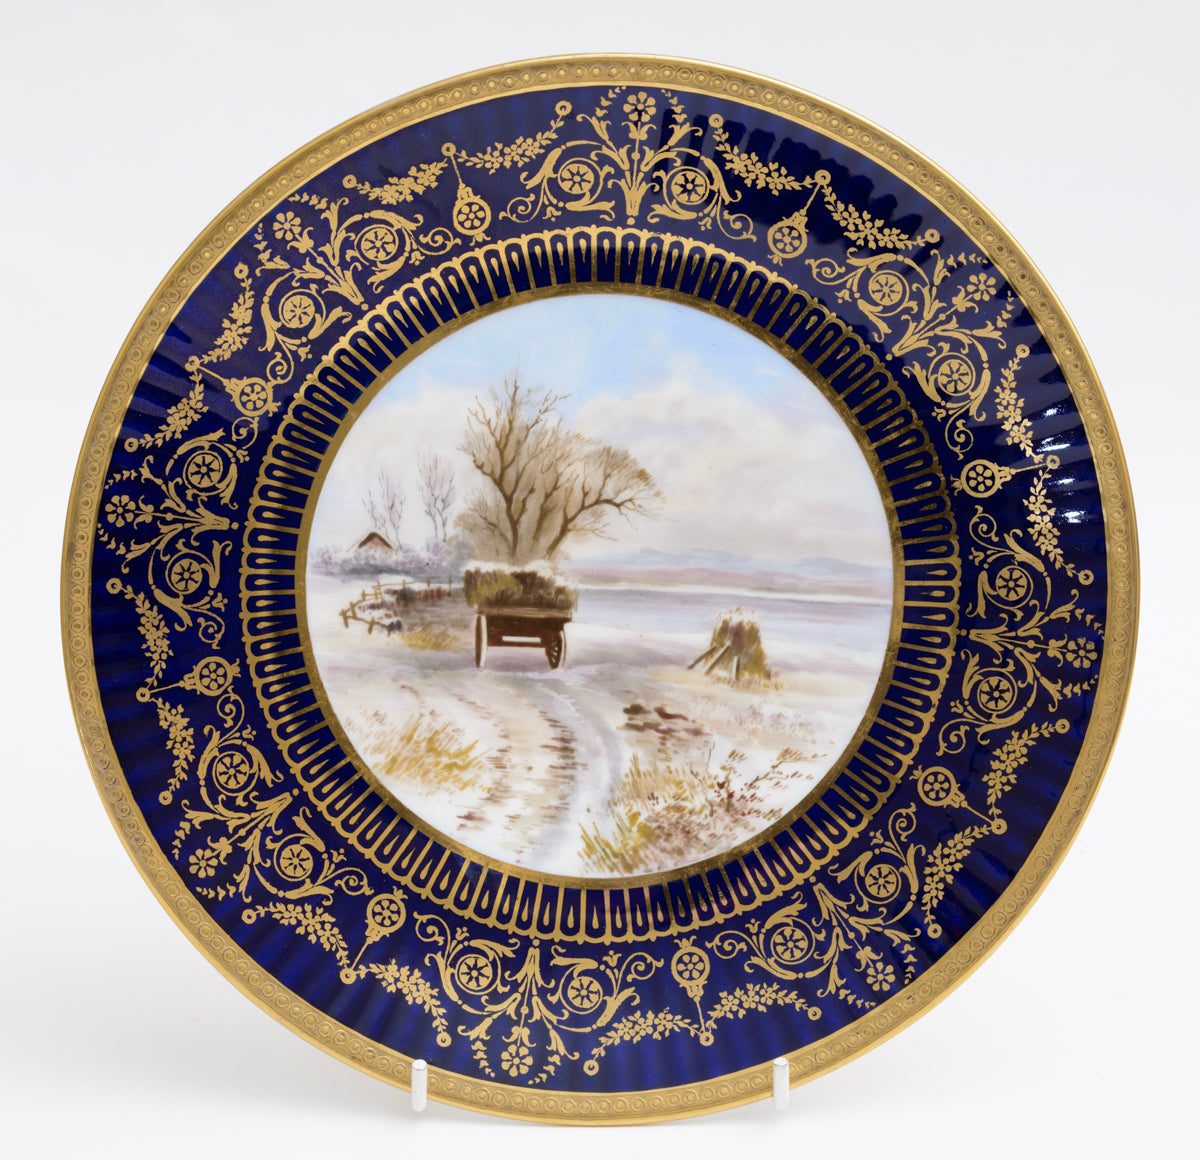 Antique Wedgwood China Hand Painted Dessert/Cabinet Plate Snowy Hay Cart Winter (3127)